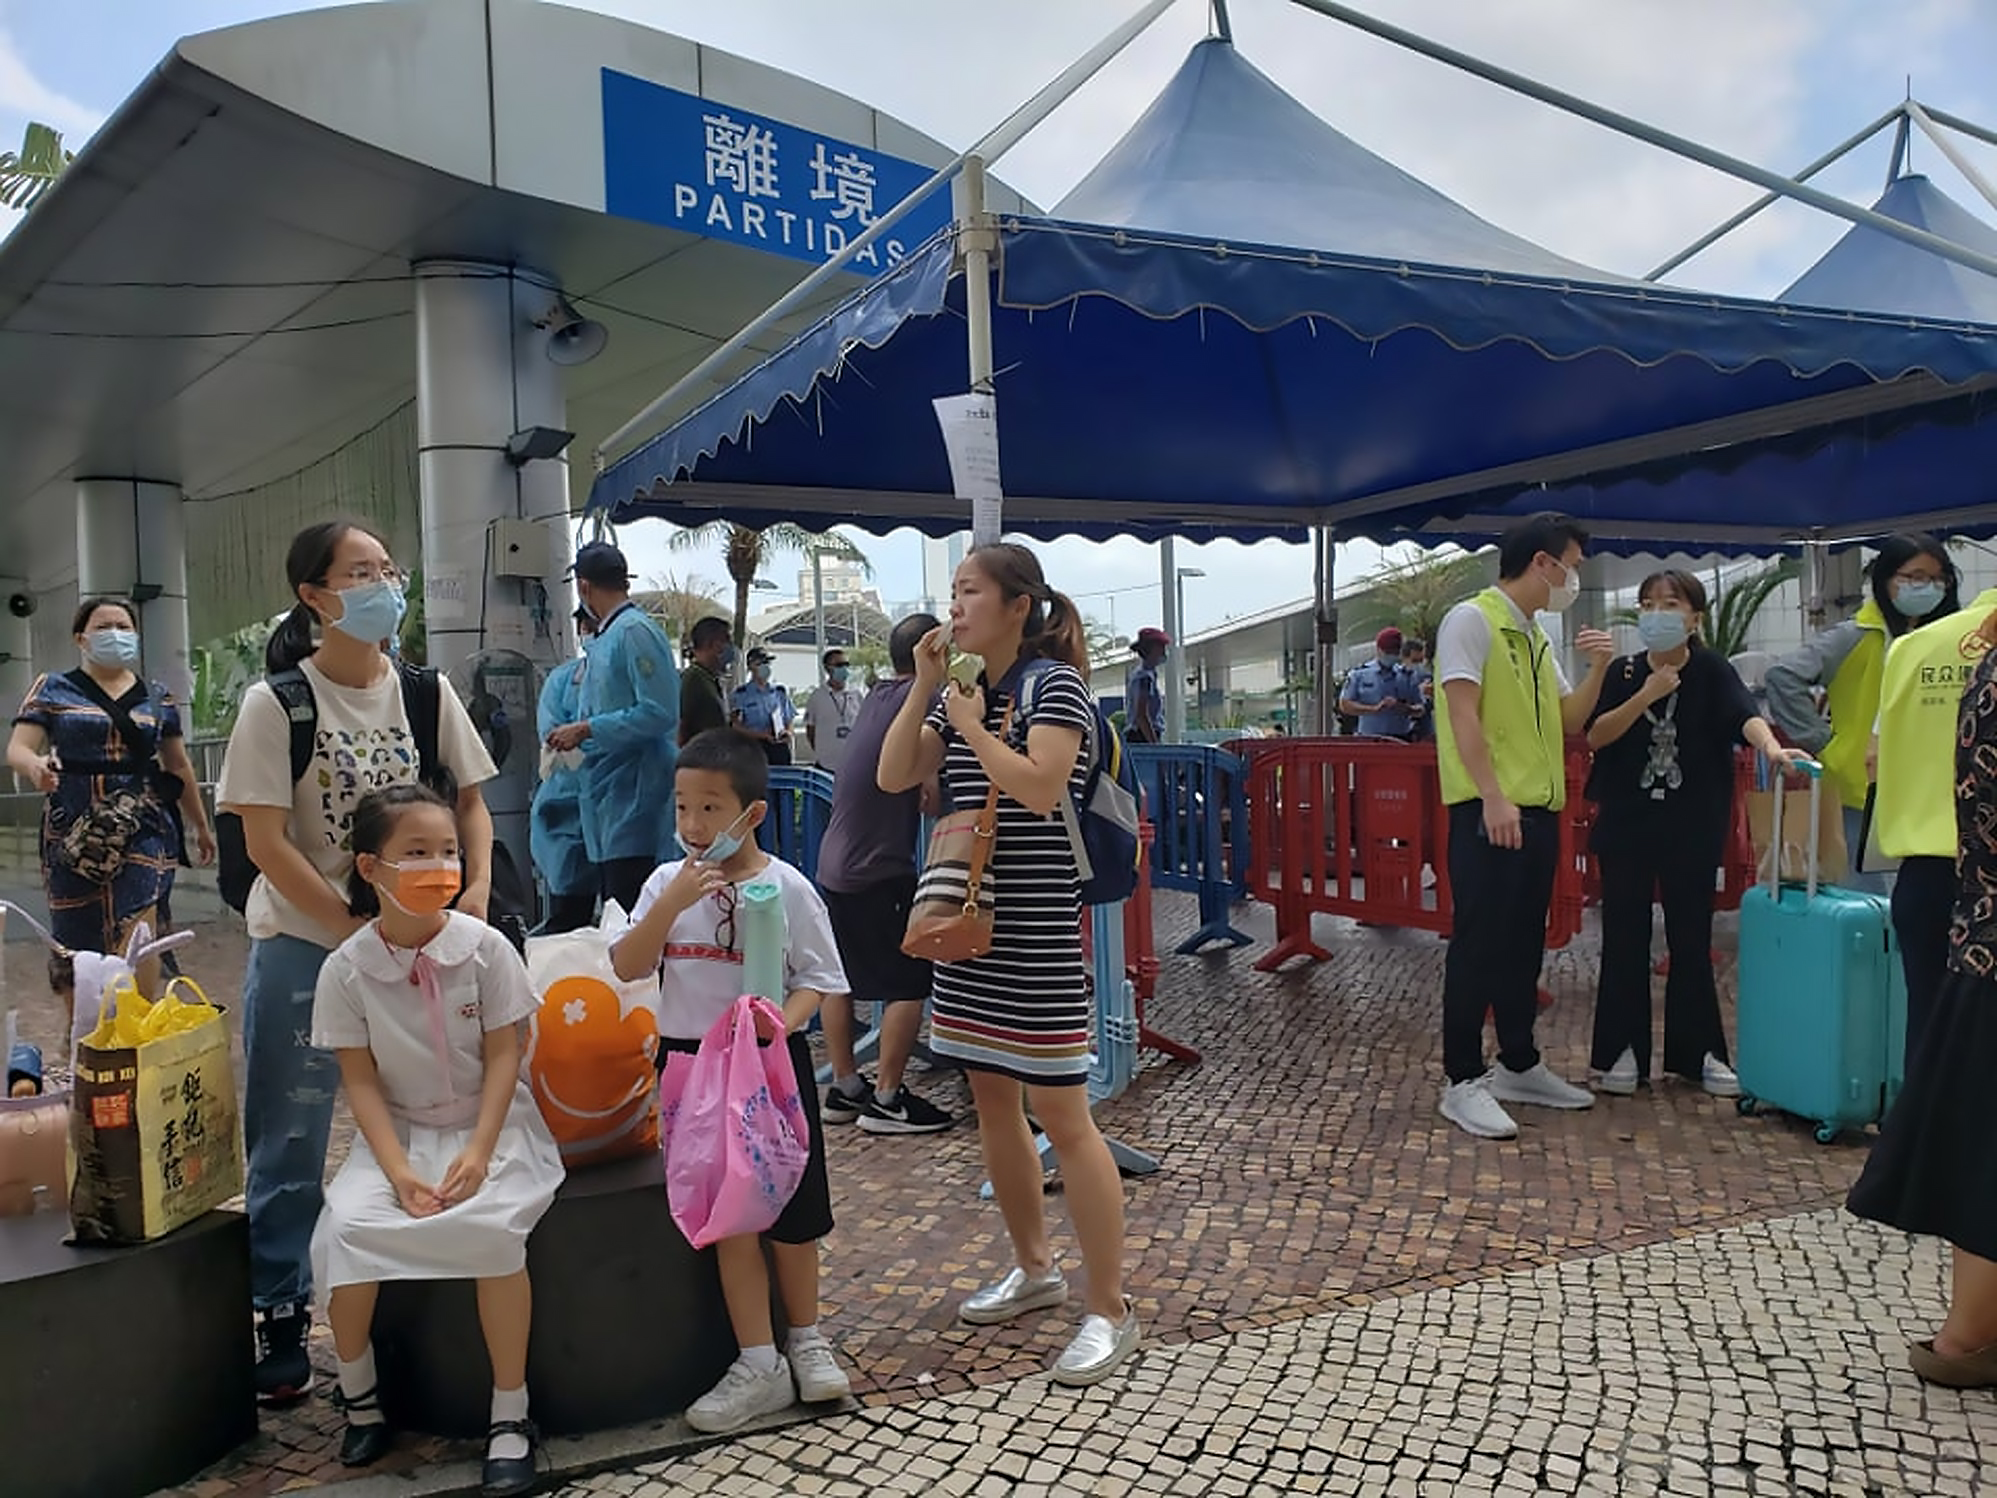 Cross-border students stuck in Macao can now quarantine at home in Zhuhai